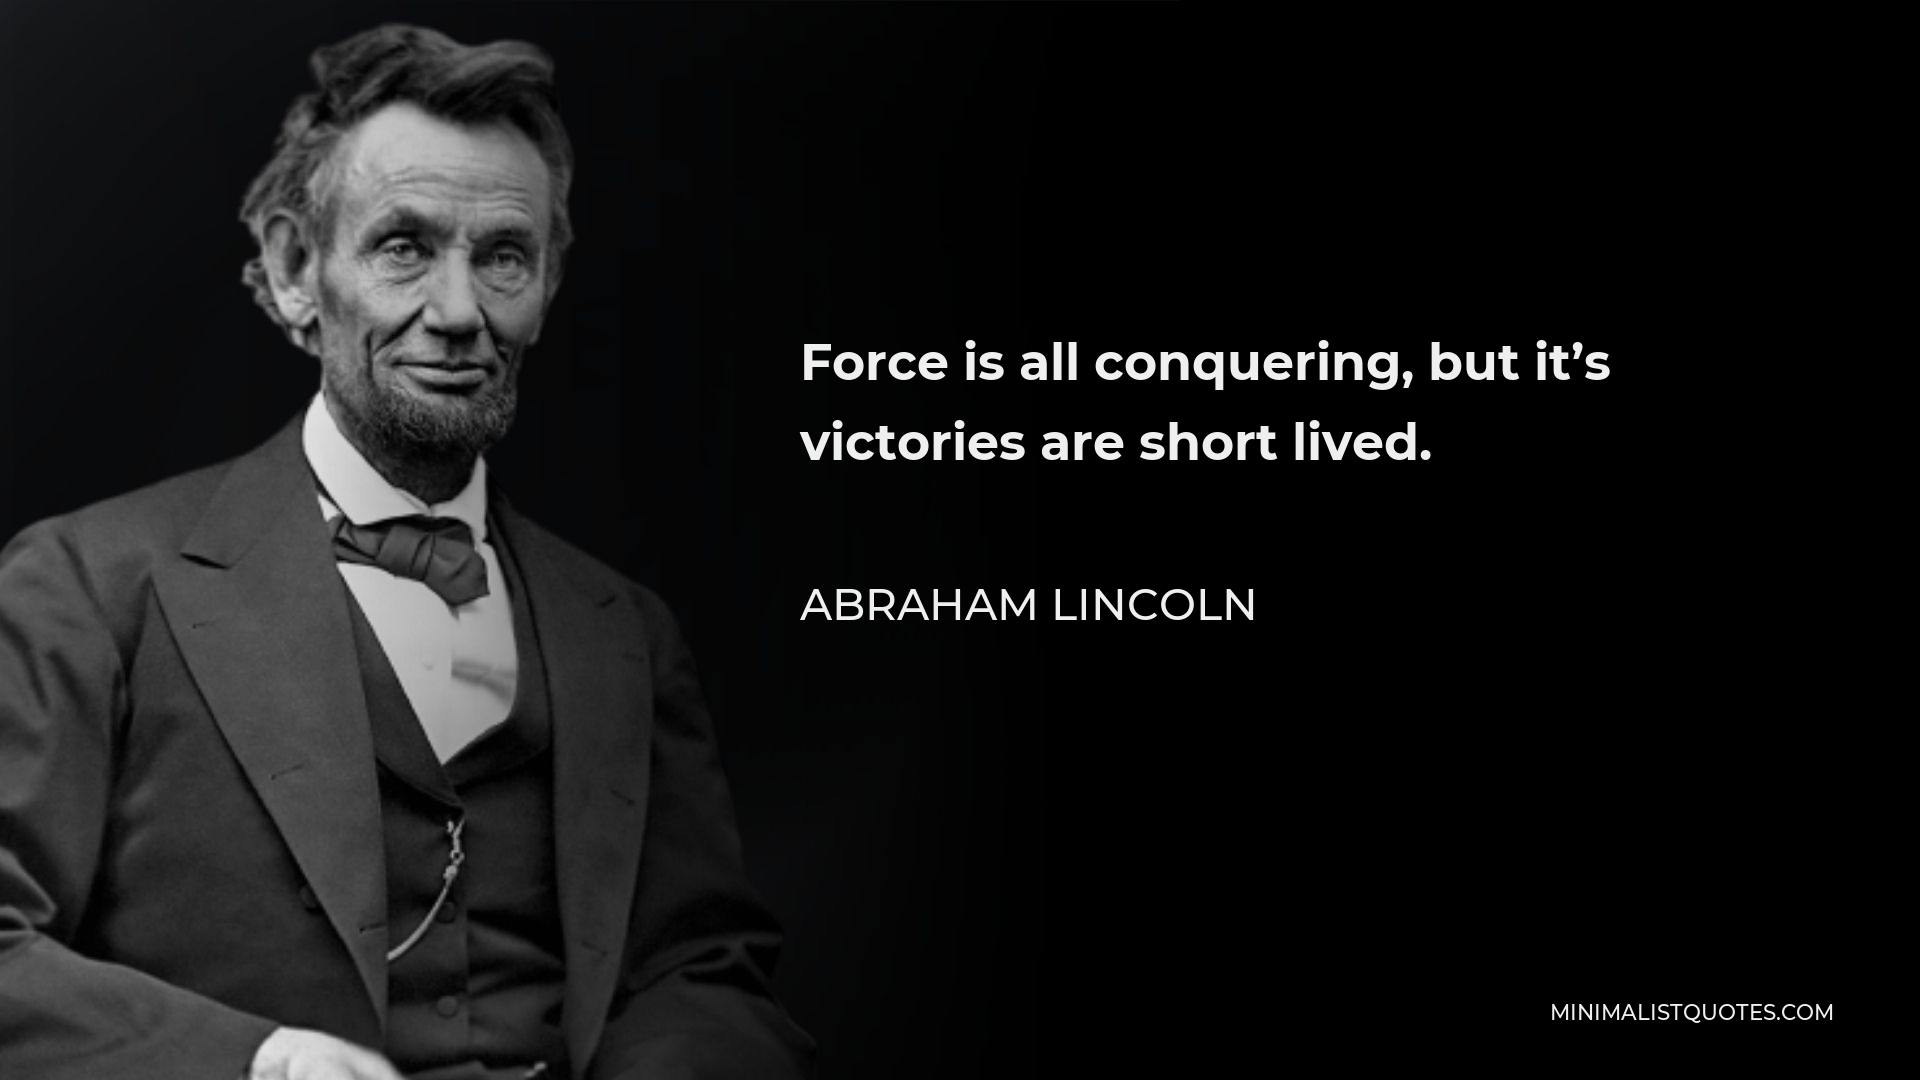 Abraham Lincoln Quote - Force is all conquering, but it’s victories are short lived.